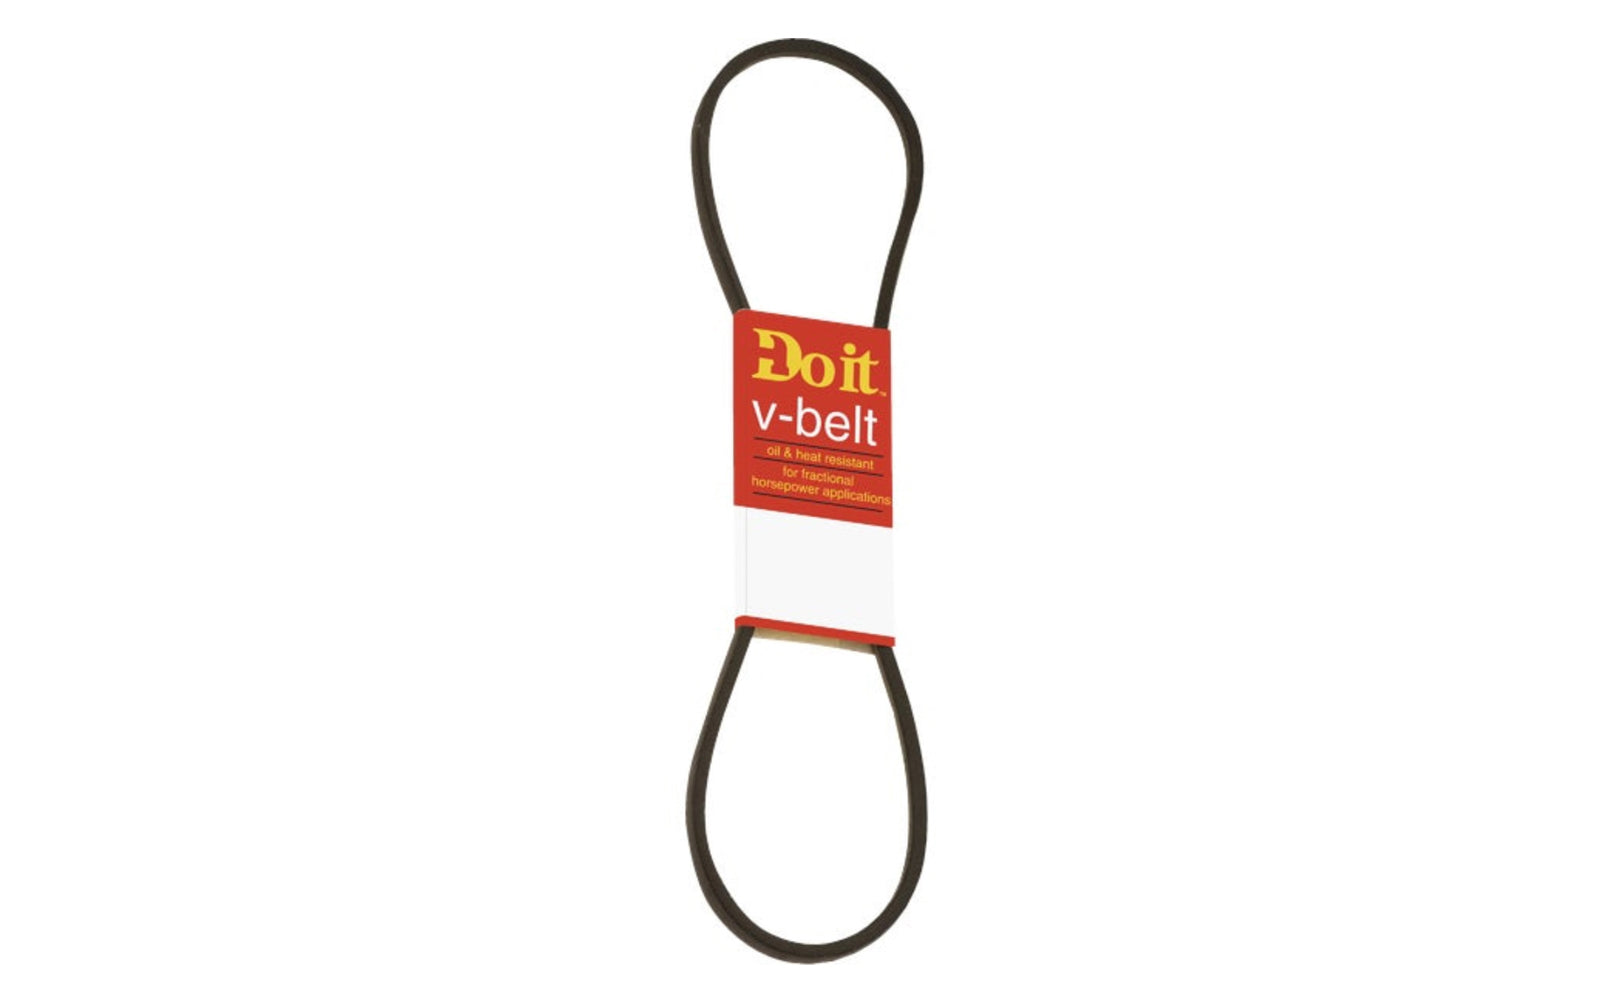 22" Long x 1/2" Width V-Belt - 4L220. Oil & heat resistant. Recommended for 1-3 HP (horsepower) light-duty applications. Typically the best option for electric powered applications. For refrigerators, washing machines, pumps, stokers, woodworking machines. Pulley type: A-Pulley.